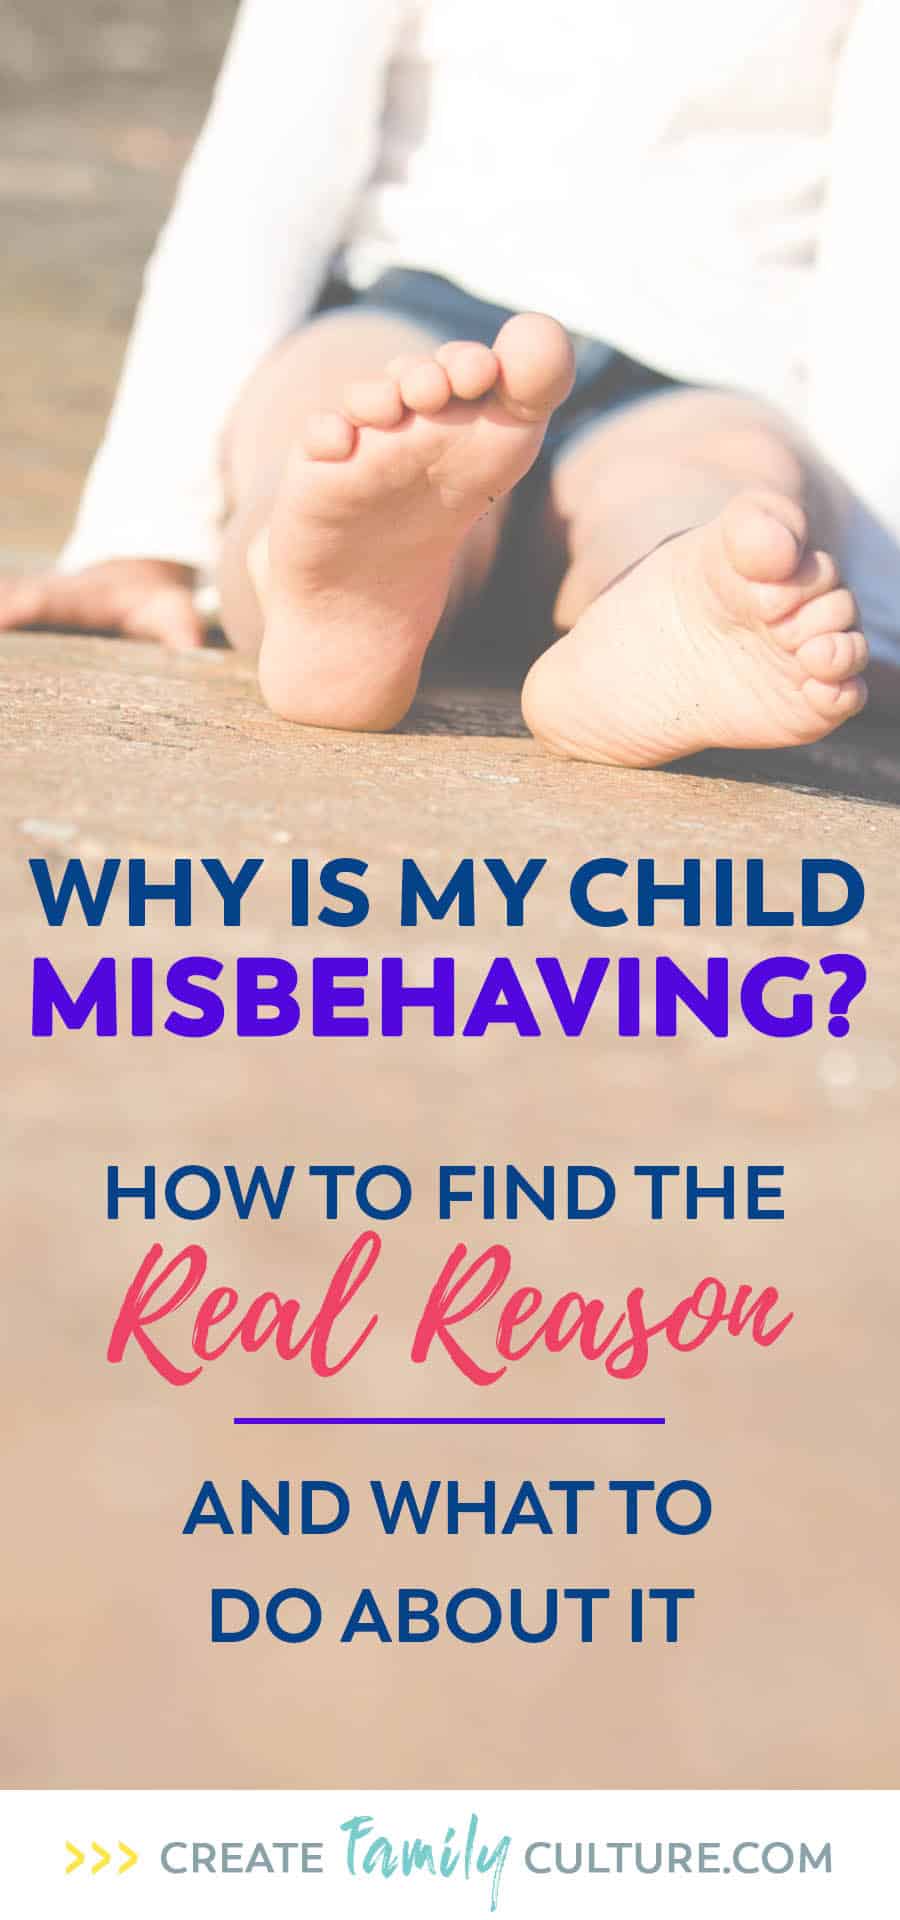 Why is my child misbehaving? How to Use Your Kids' Bad Behavior to Bring Out Their Strengths | Parenting Tips on Discipline | Intentional Parenting #parentingtips #discipline